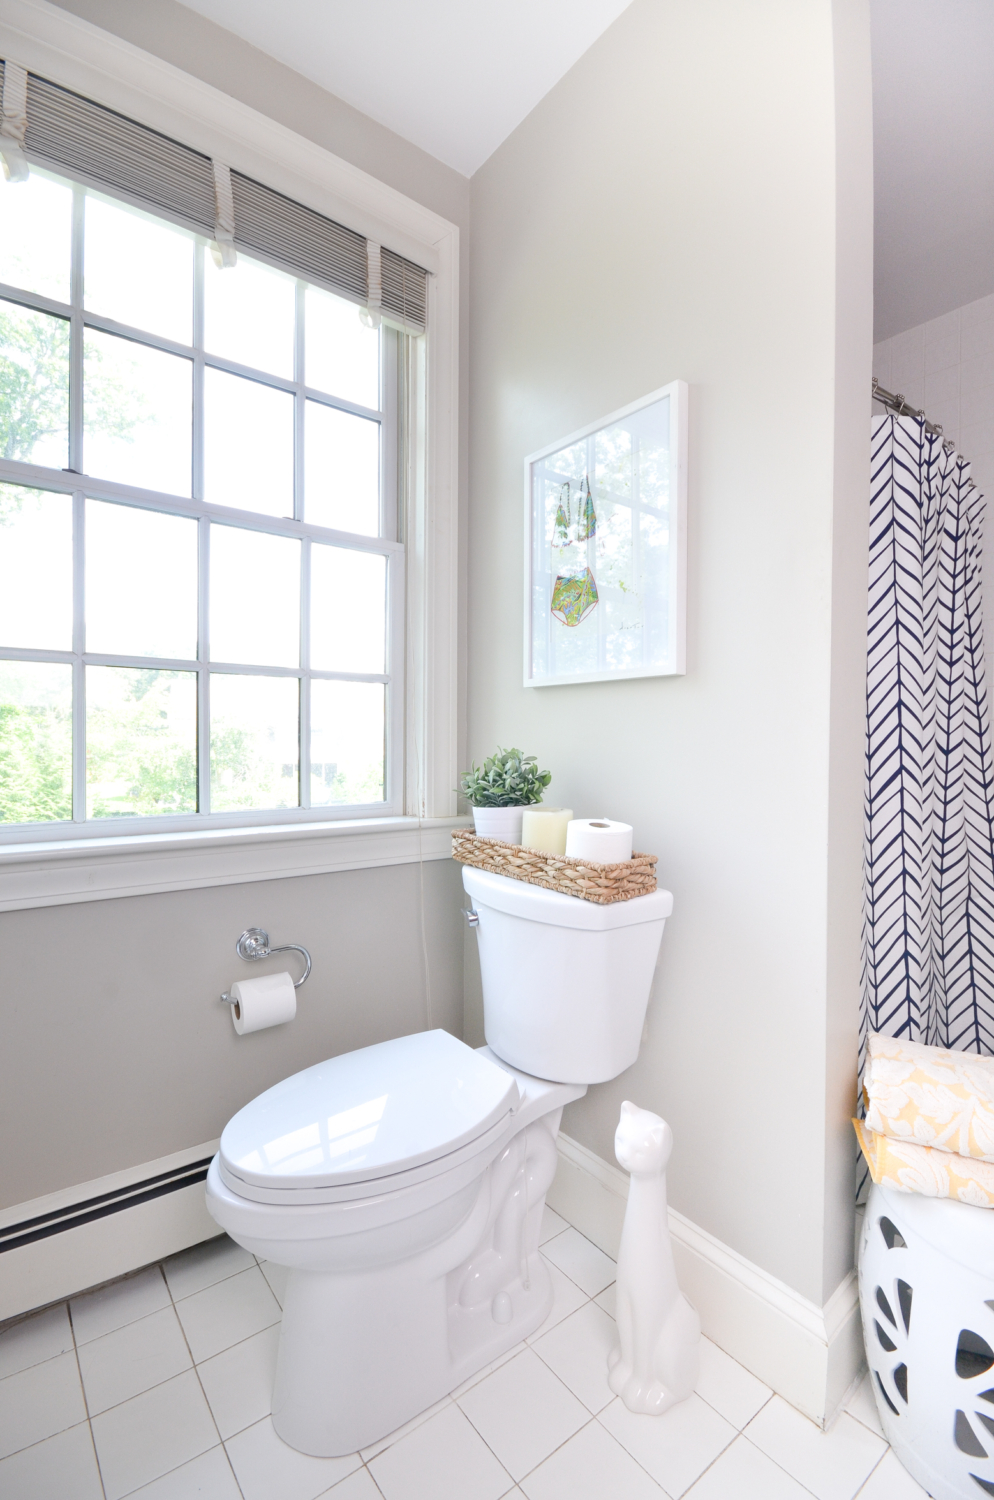 Easy tips for a clean bathroom that you can use everyday, plus sources for this pretty, simple white and navy bathroom